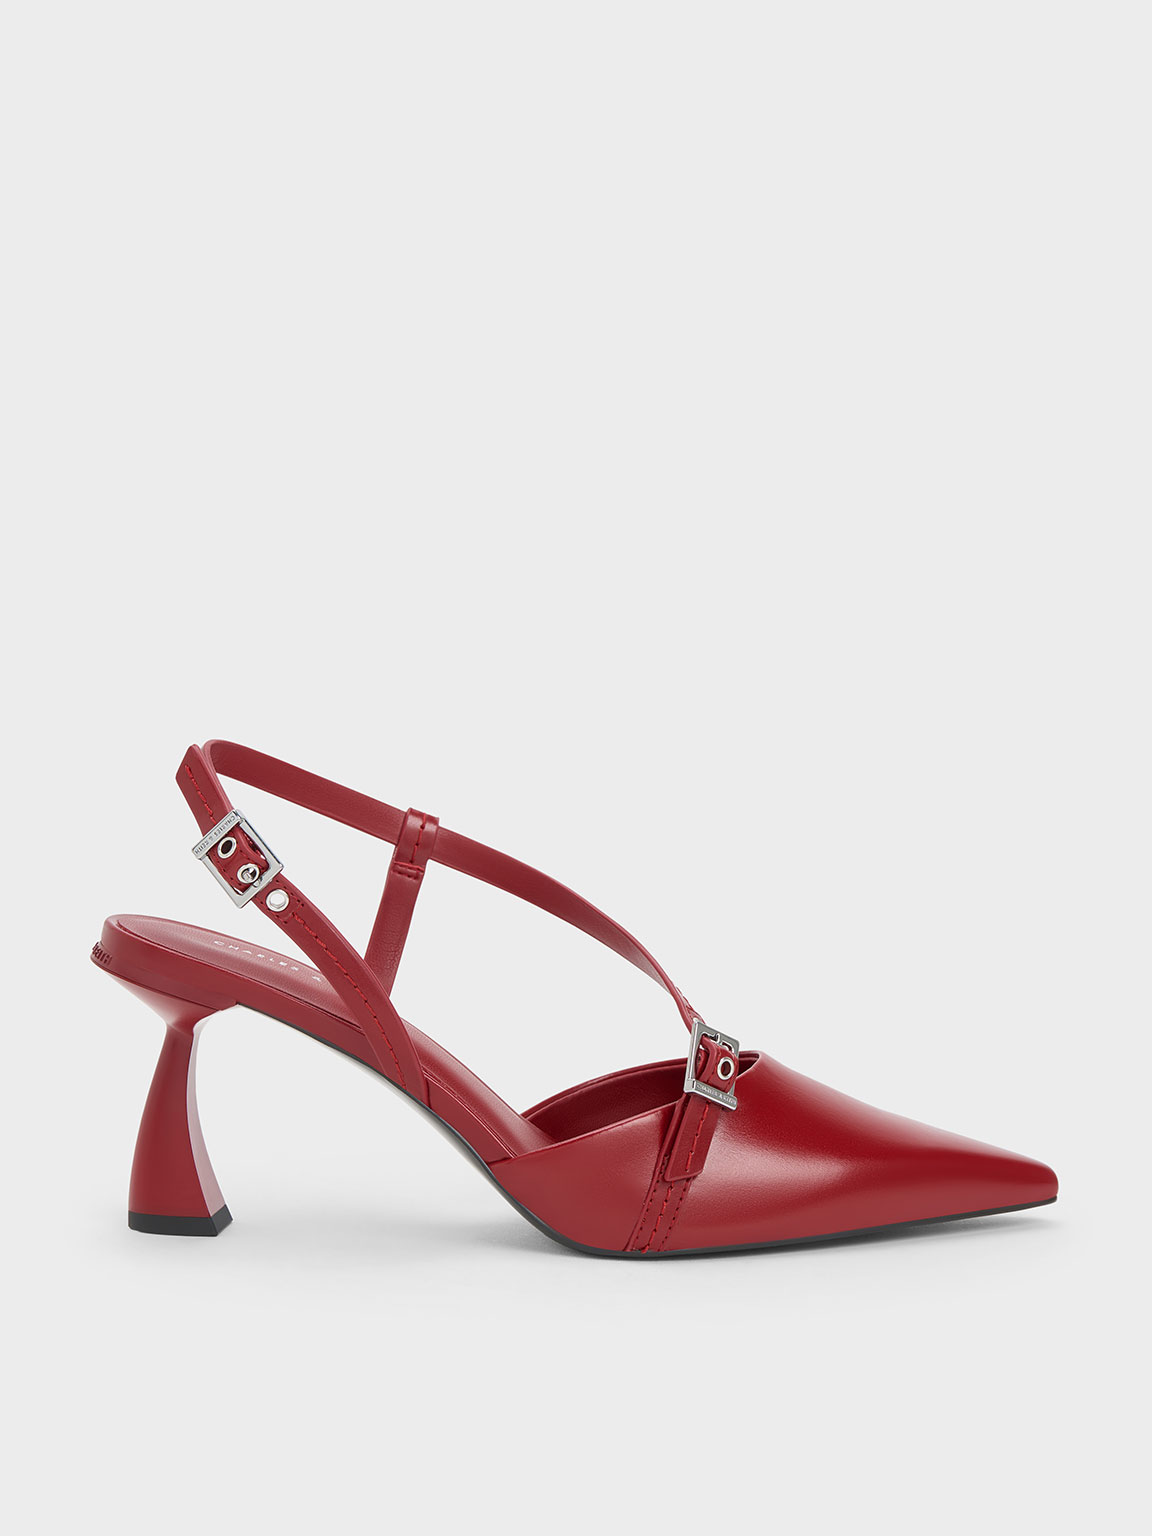 Red Patent Pointed-Toe Pumps | Womens | 6.5 (Available in 8, 7.5, 7, 6, 5.5, 5, 9, 8.5, 10, 11) | Lulus Exclusive